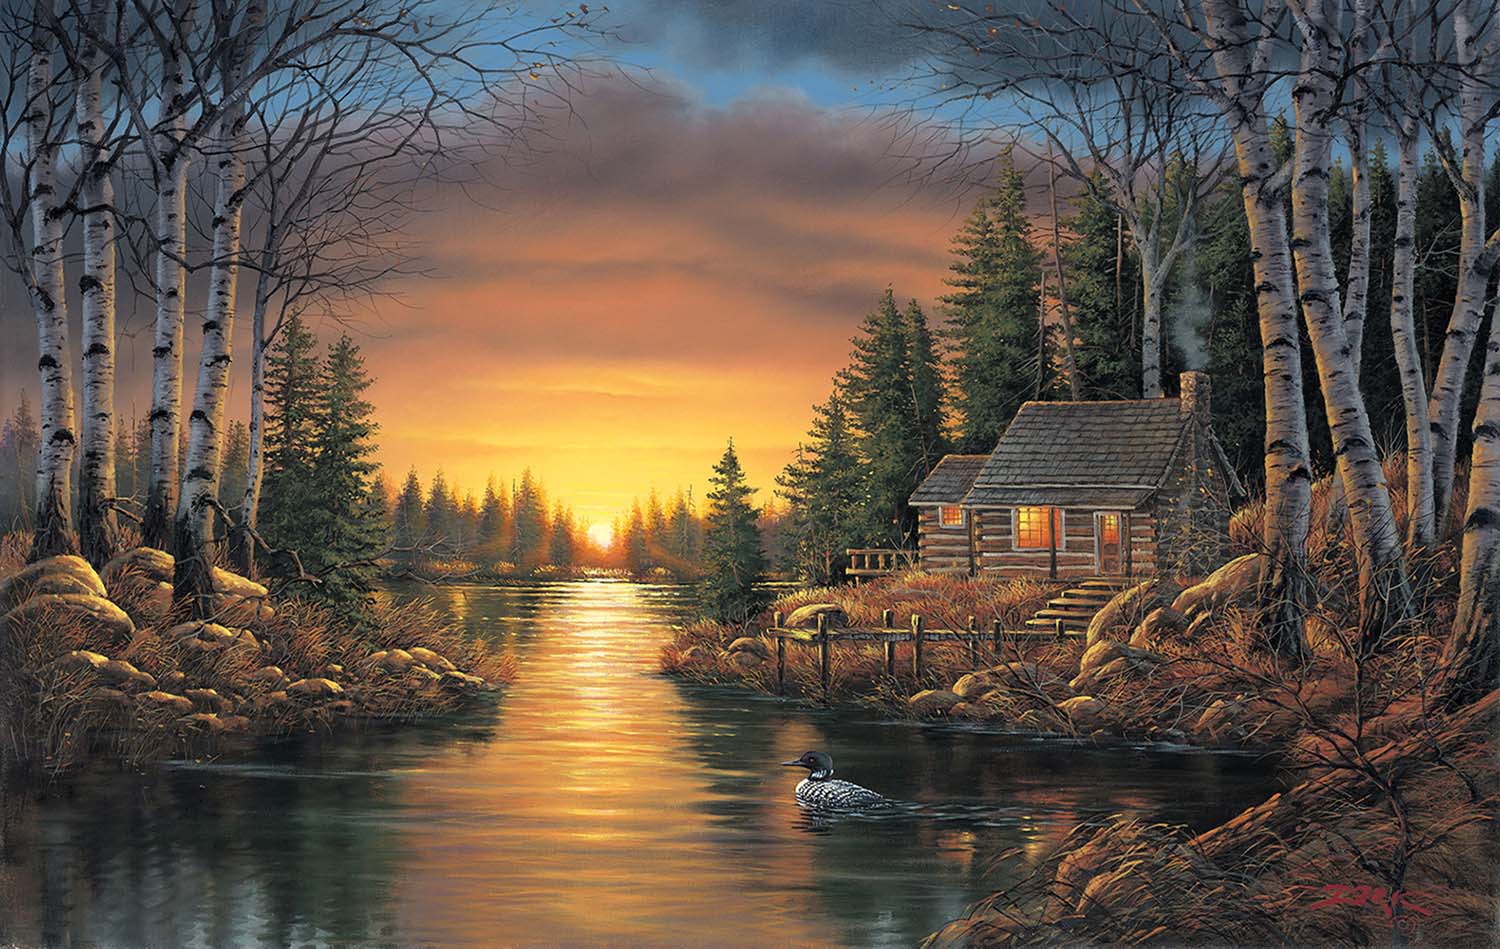 Shadows of the Evening Landscape Jigsaw Puzzle